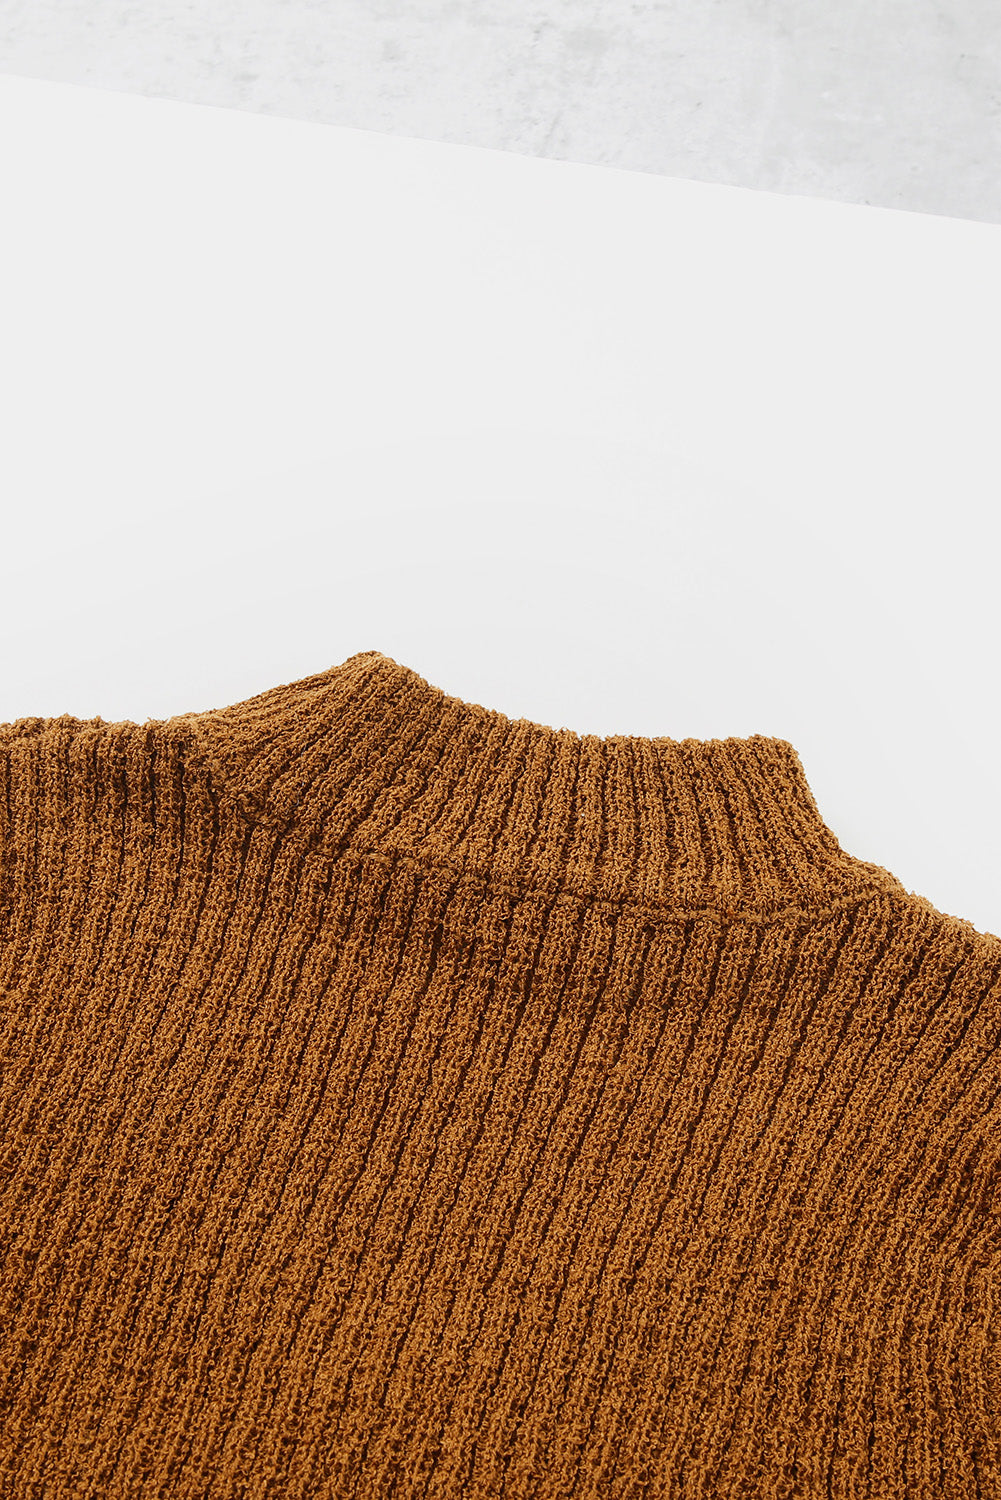 Khaki High Neck Hollow-Out Crossed Wrap Knit Sweater